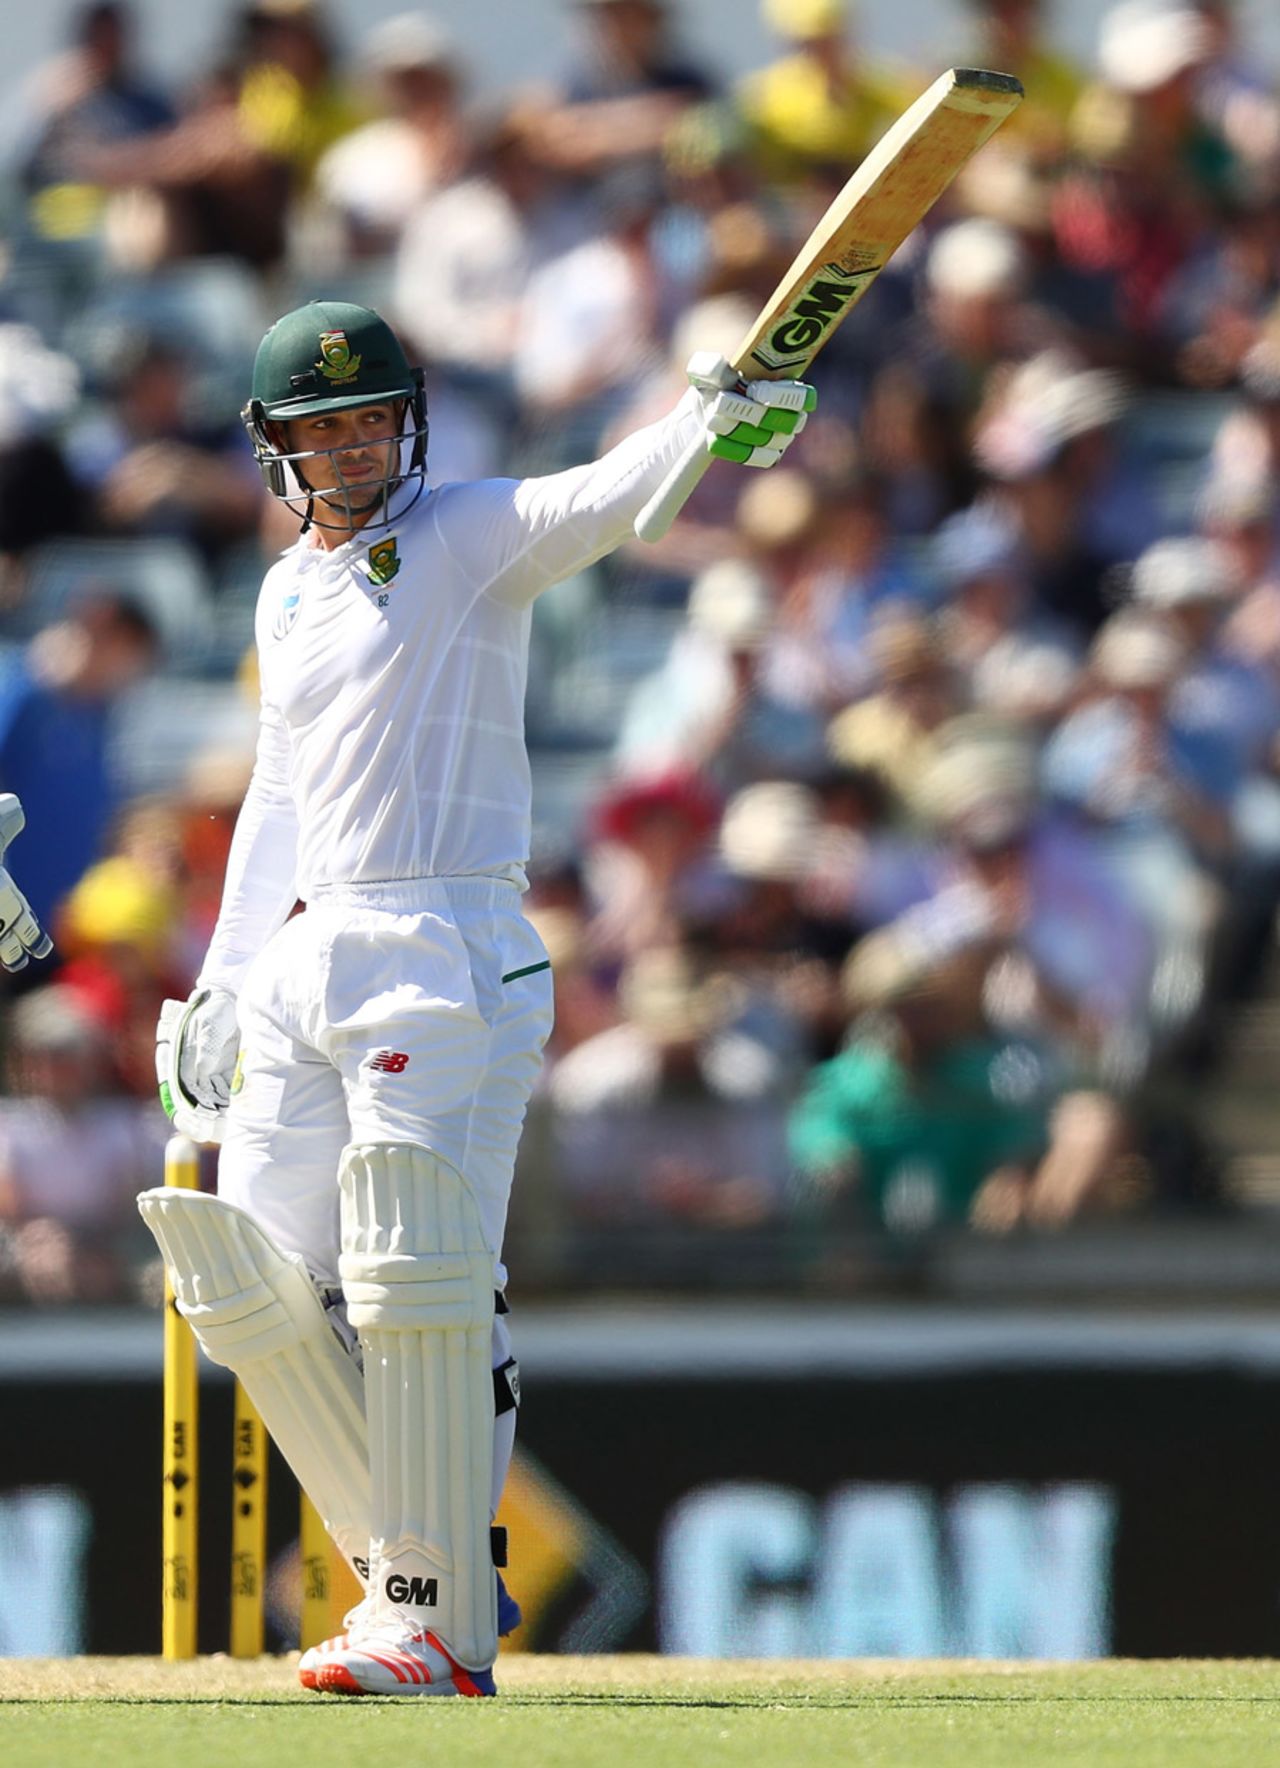 Quinton de Kock acknowledges the applause after reaching his fifty, Australia v South Africa, 1st Test, Perth, 1st day, November 3, 2016